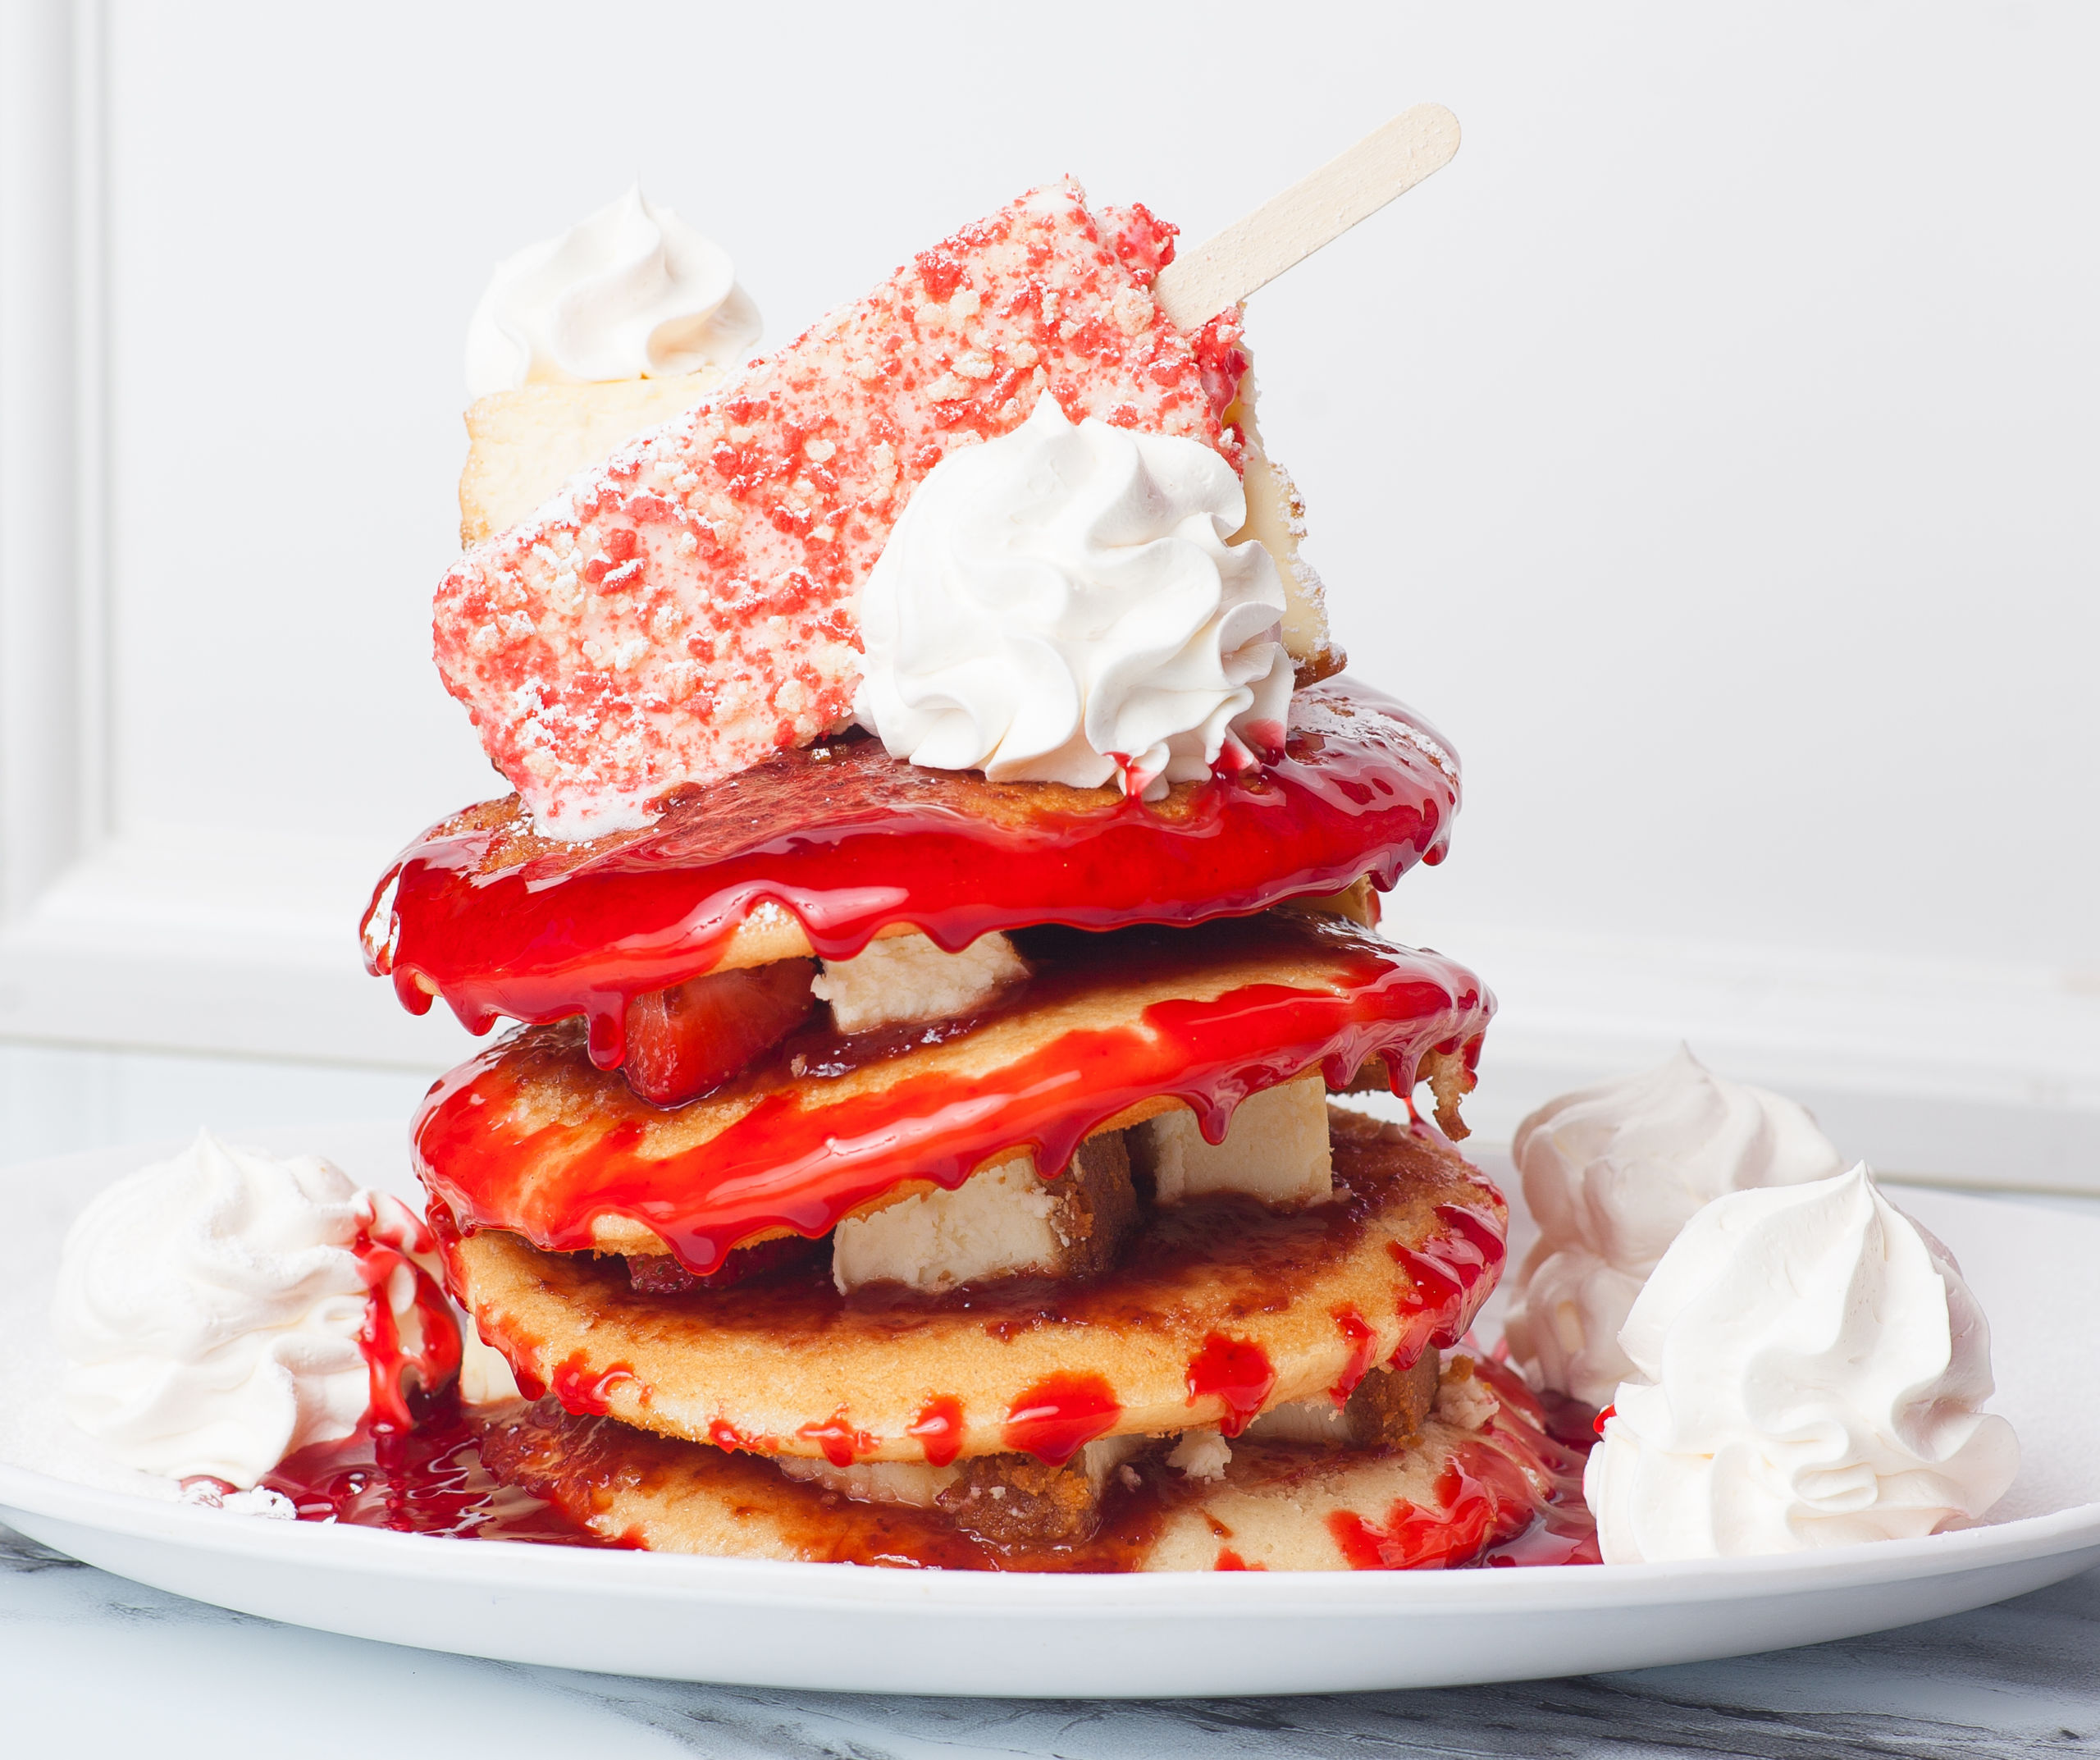 Cheesecake pancakes from The Sugar Factory